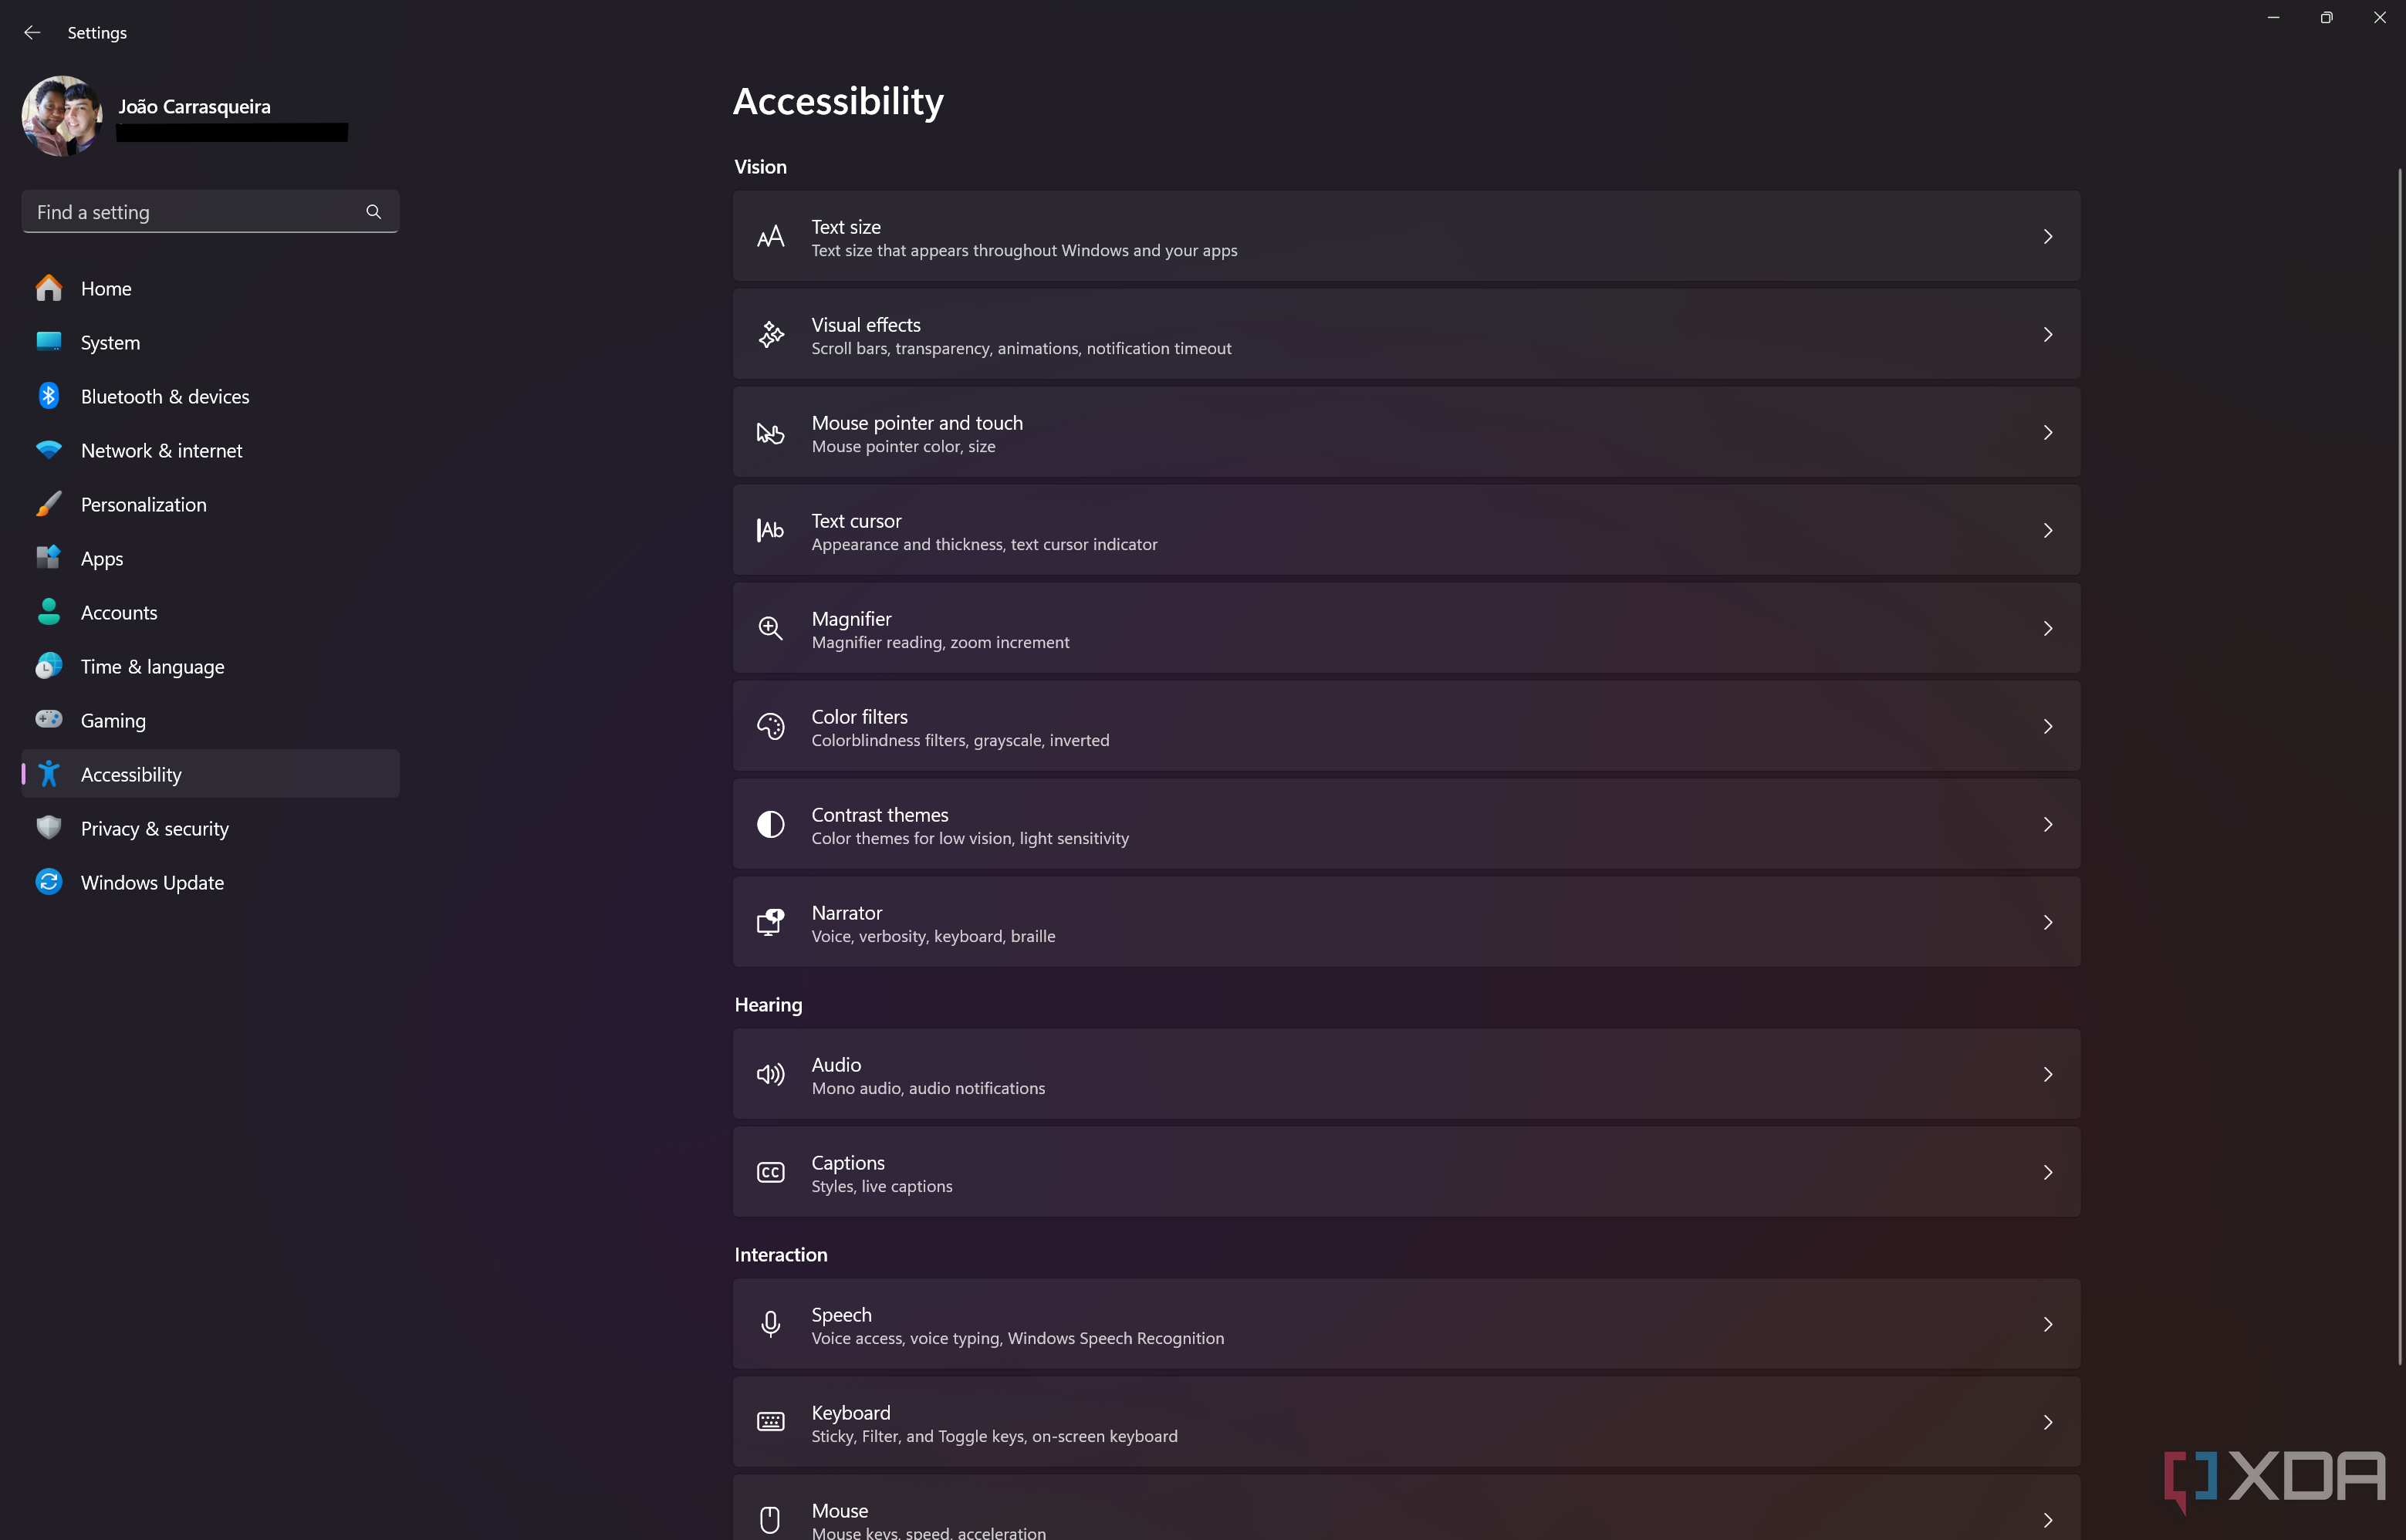 Screenshot of the Accessibility section in Windows 11 Settings